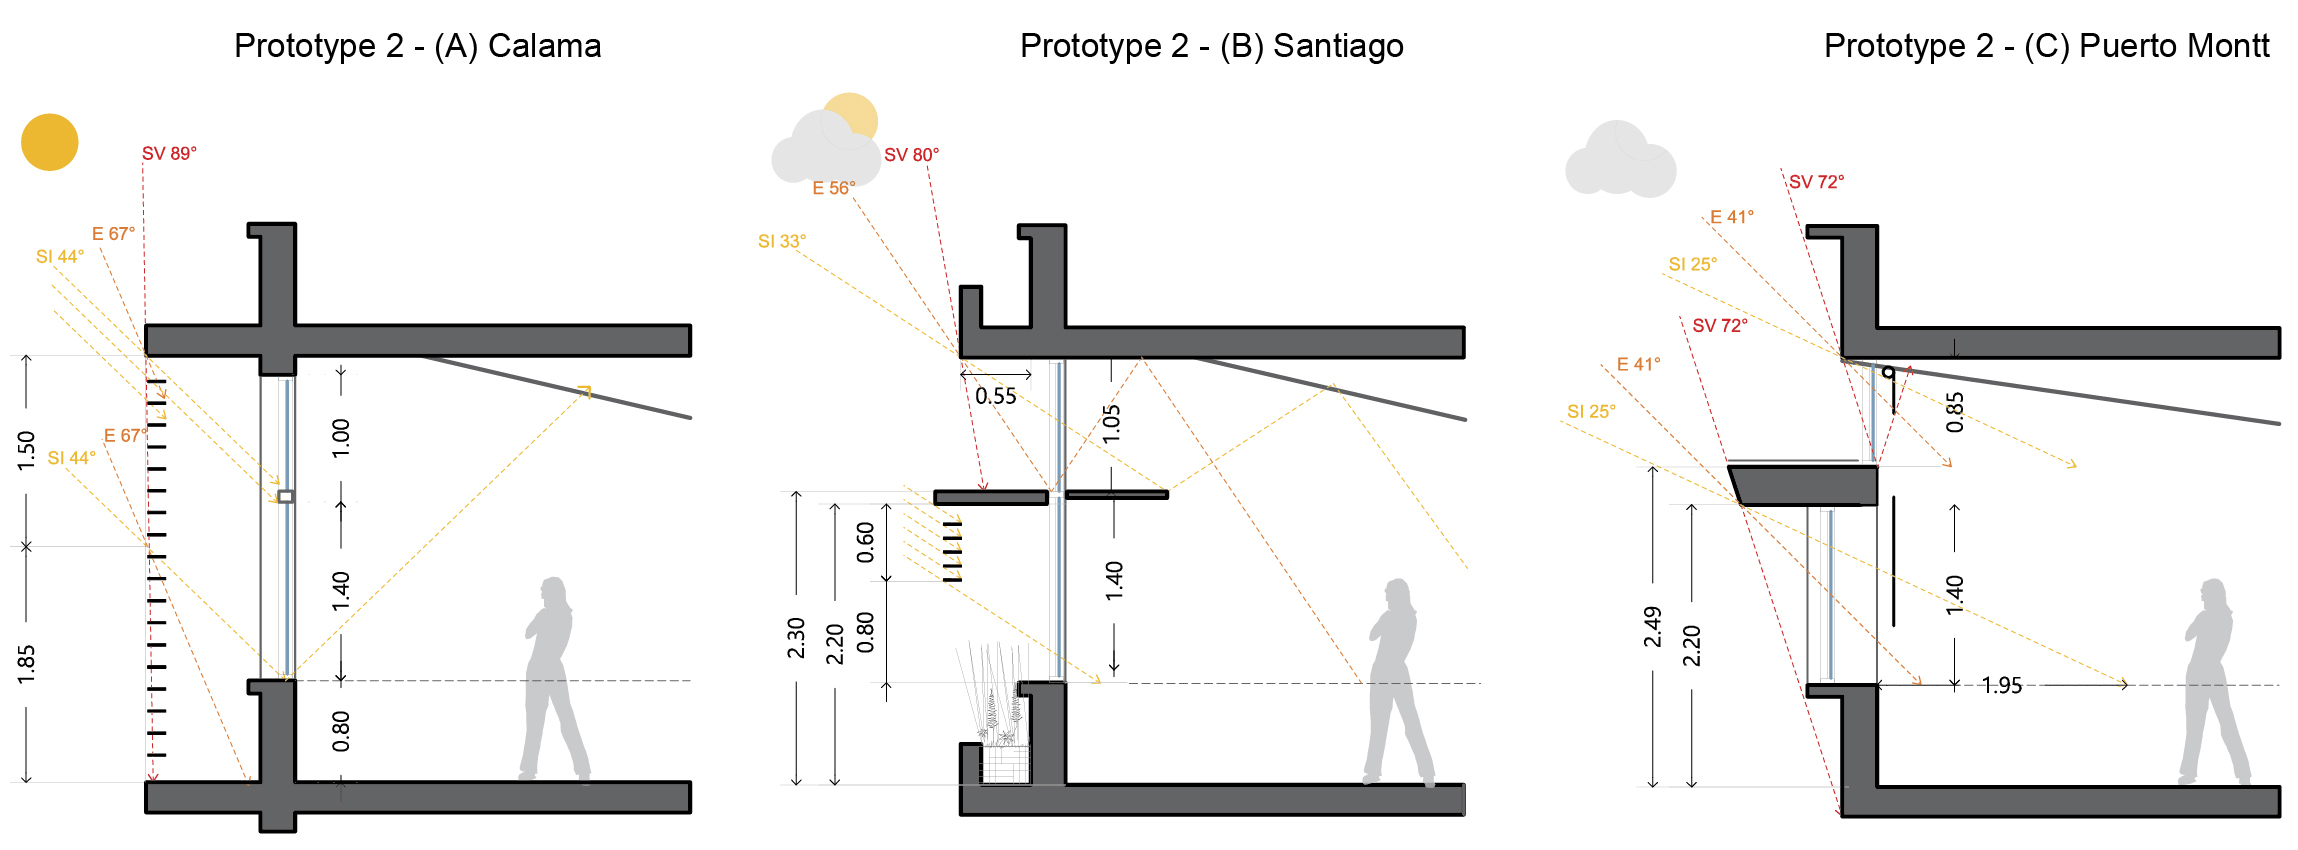 Prototype 2: optimised models with passive solar strategies in different climate contexts.